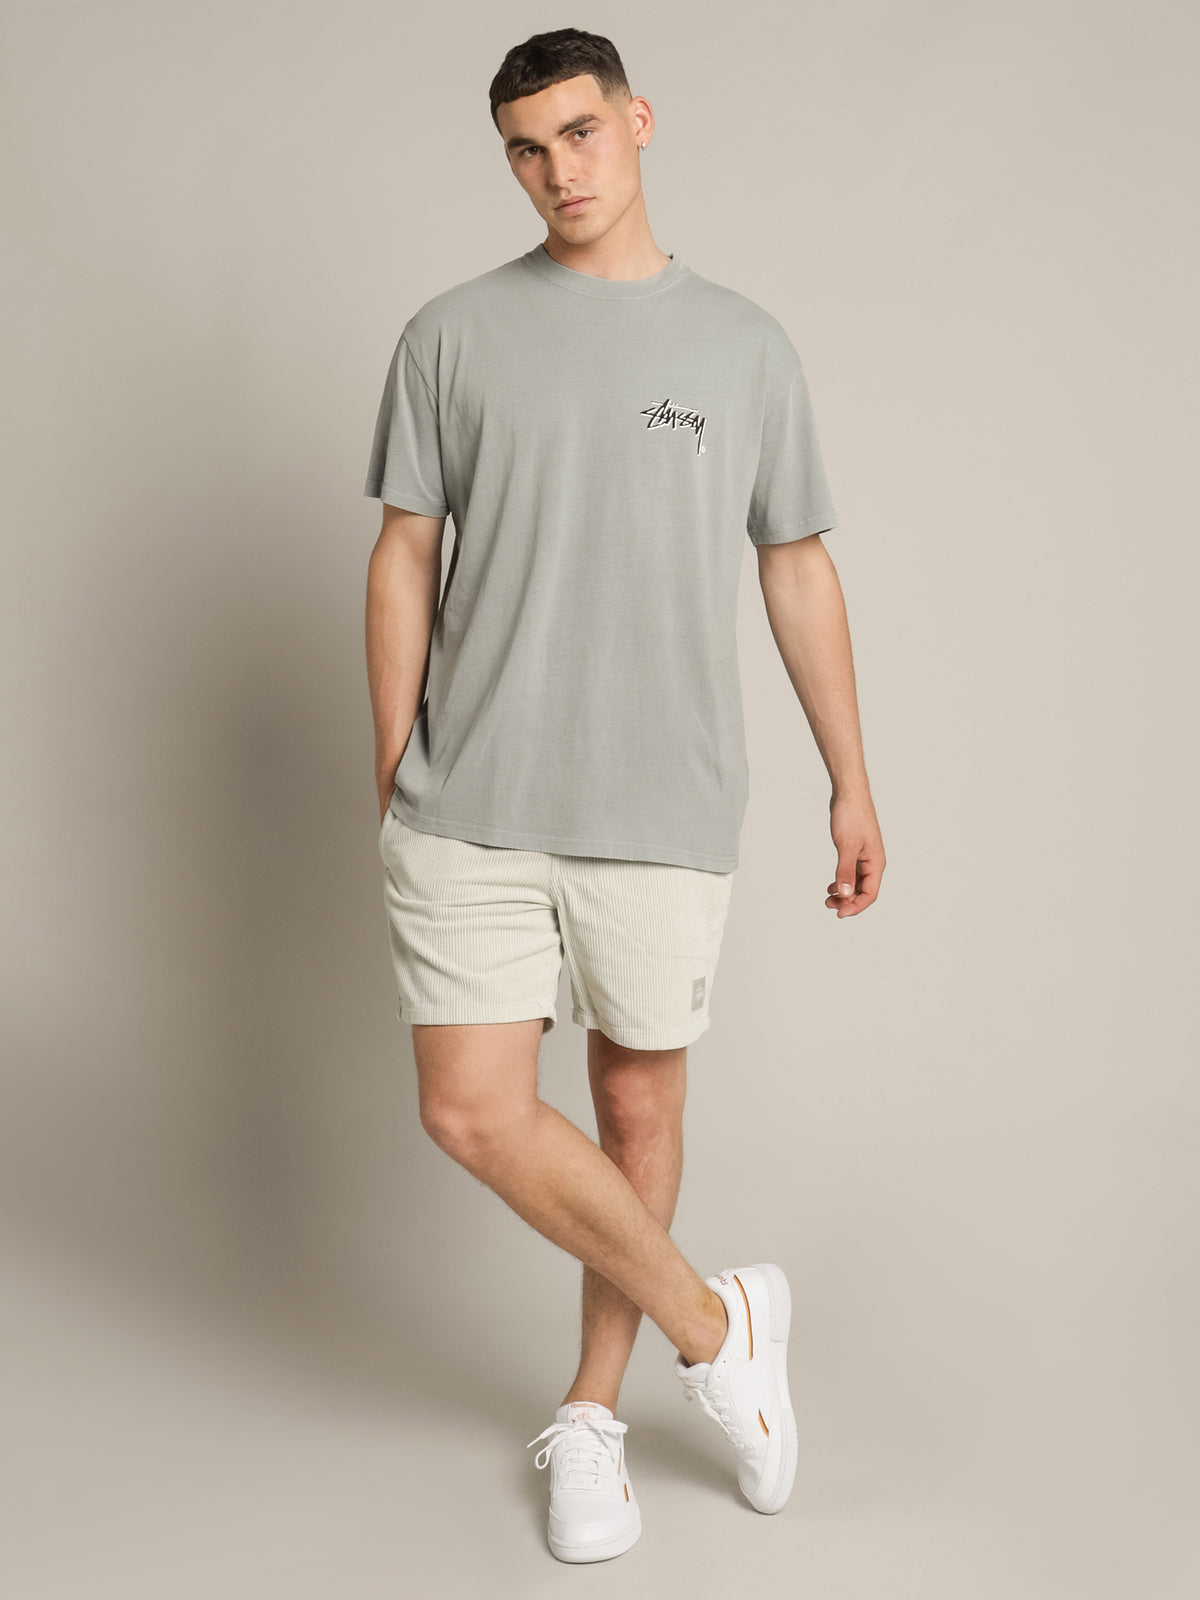 Shadow Stock T-Shirt in Pale Grey